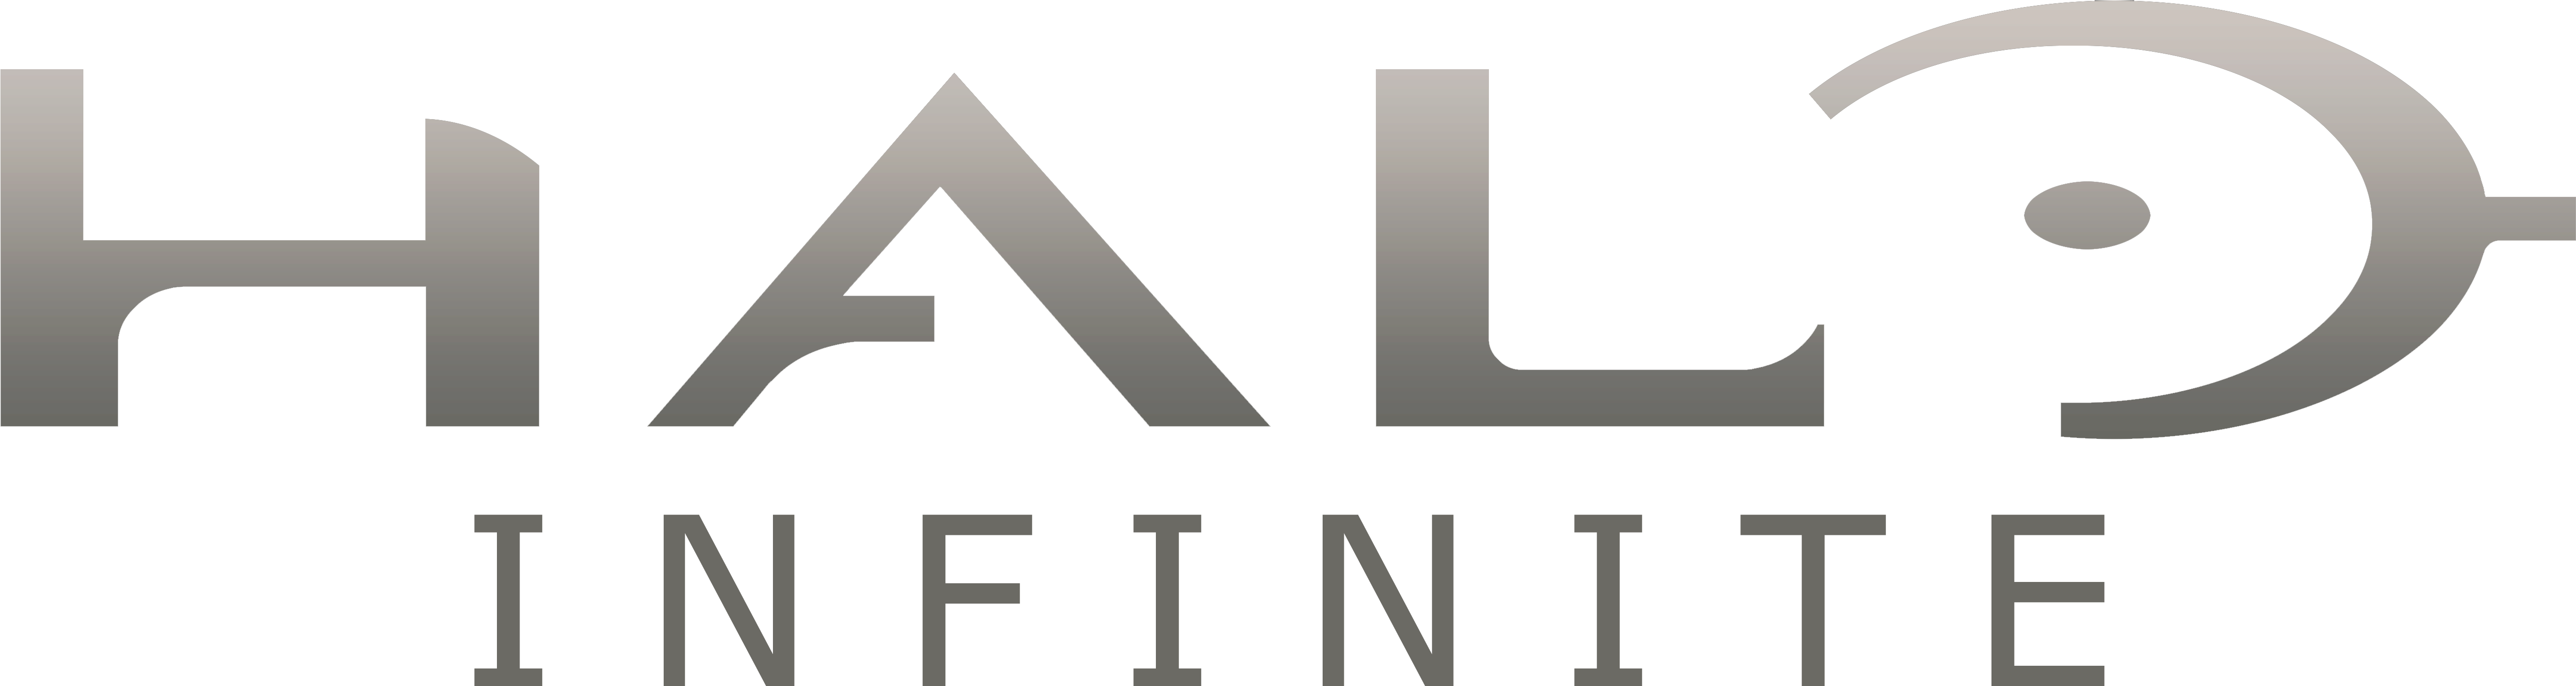 Halo Infinite Logo PNG Clipart Background